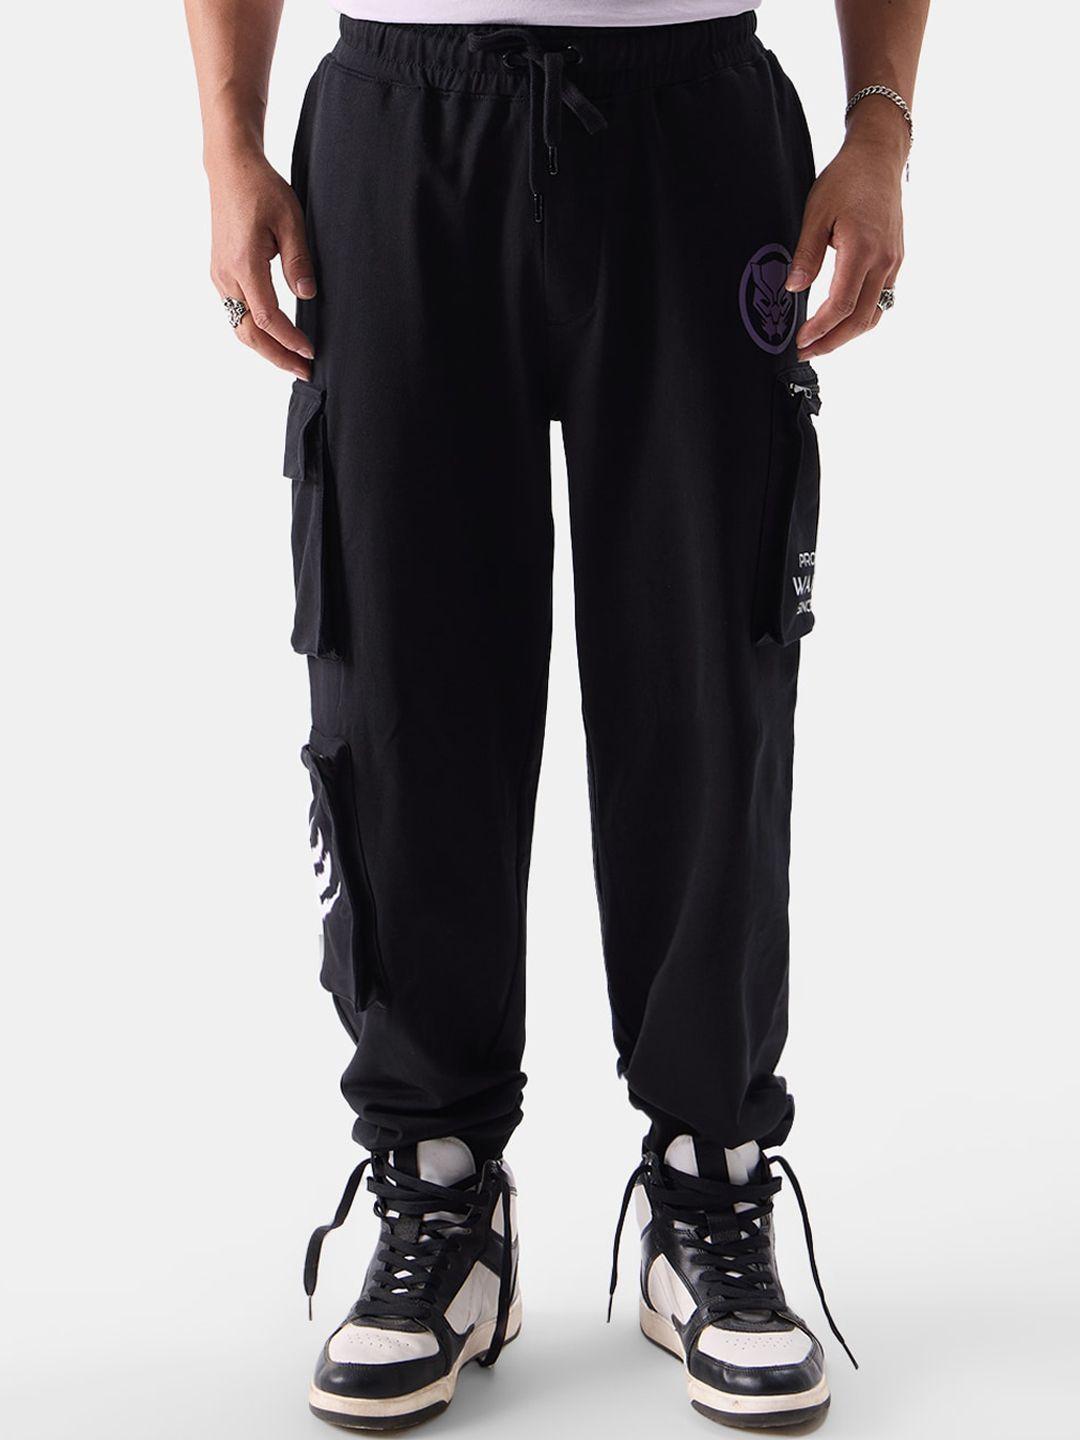 the souled store men black relaxed travel black panther printed cargos trousers